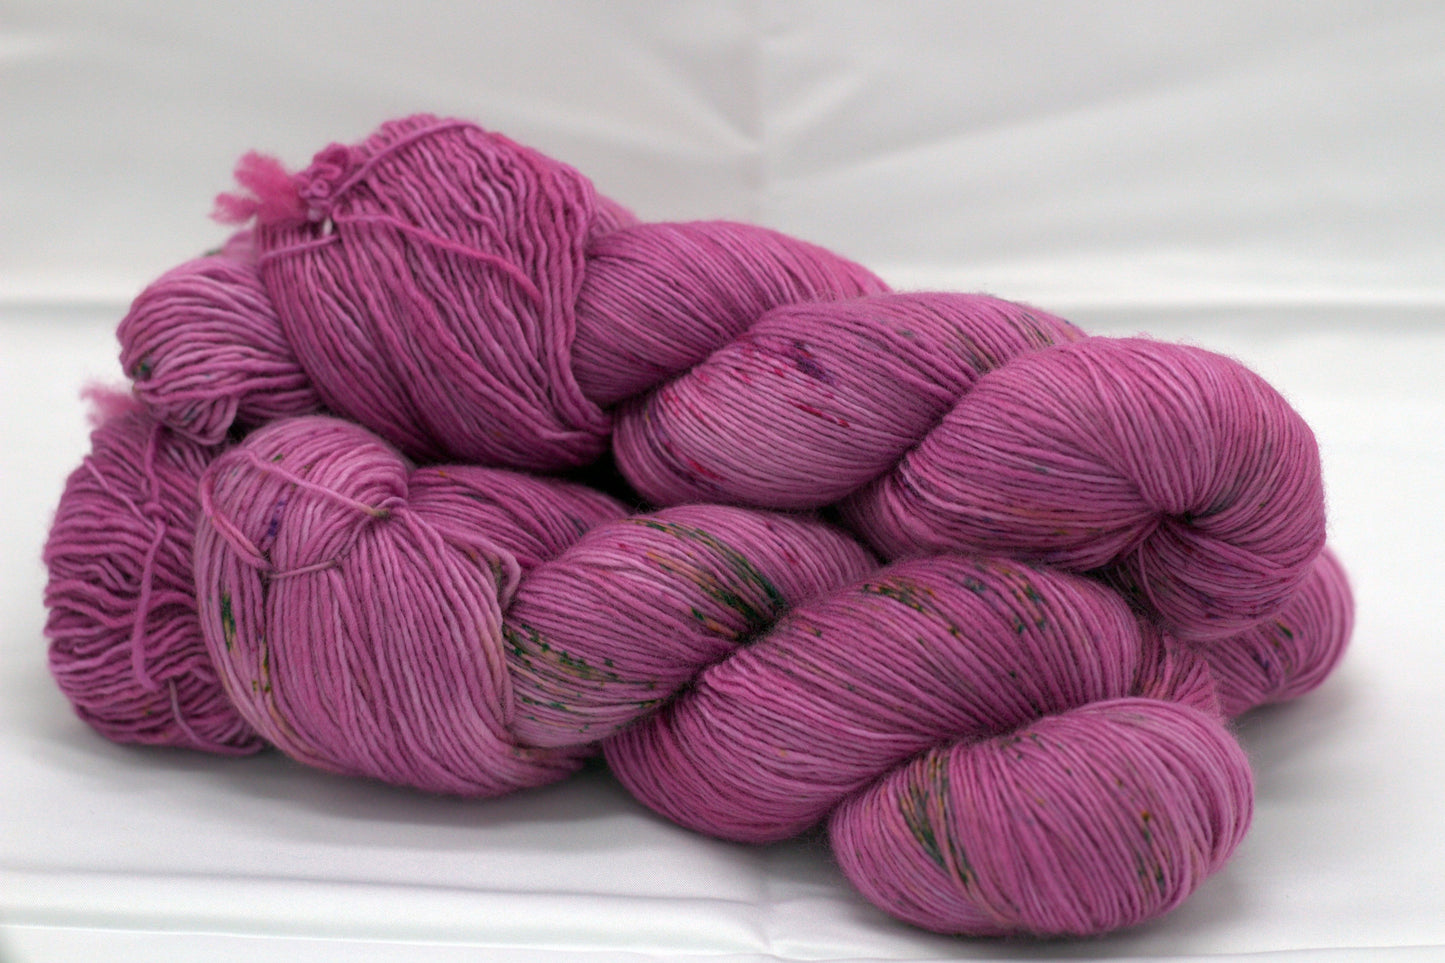 Deep Orchid Speckle, Soft Singles Fingering Weight Yarn